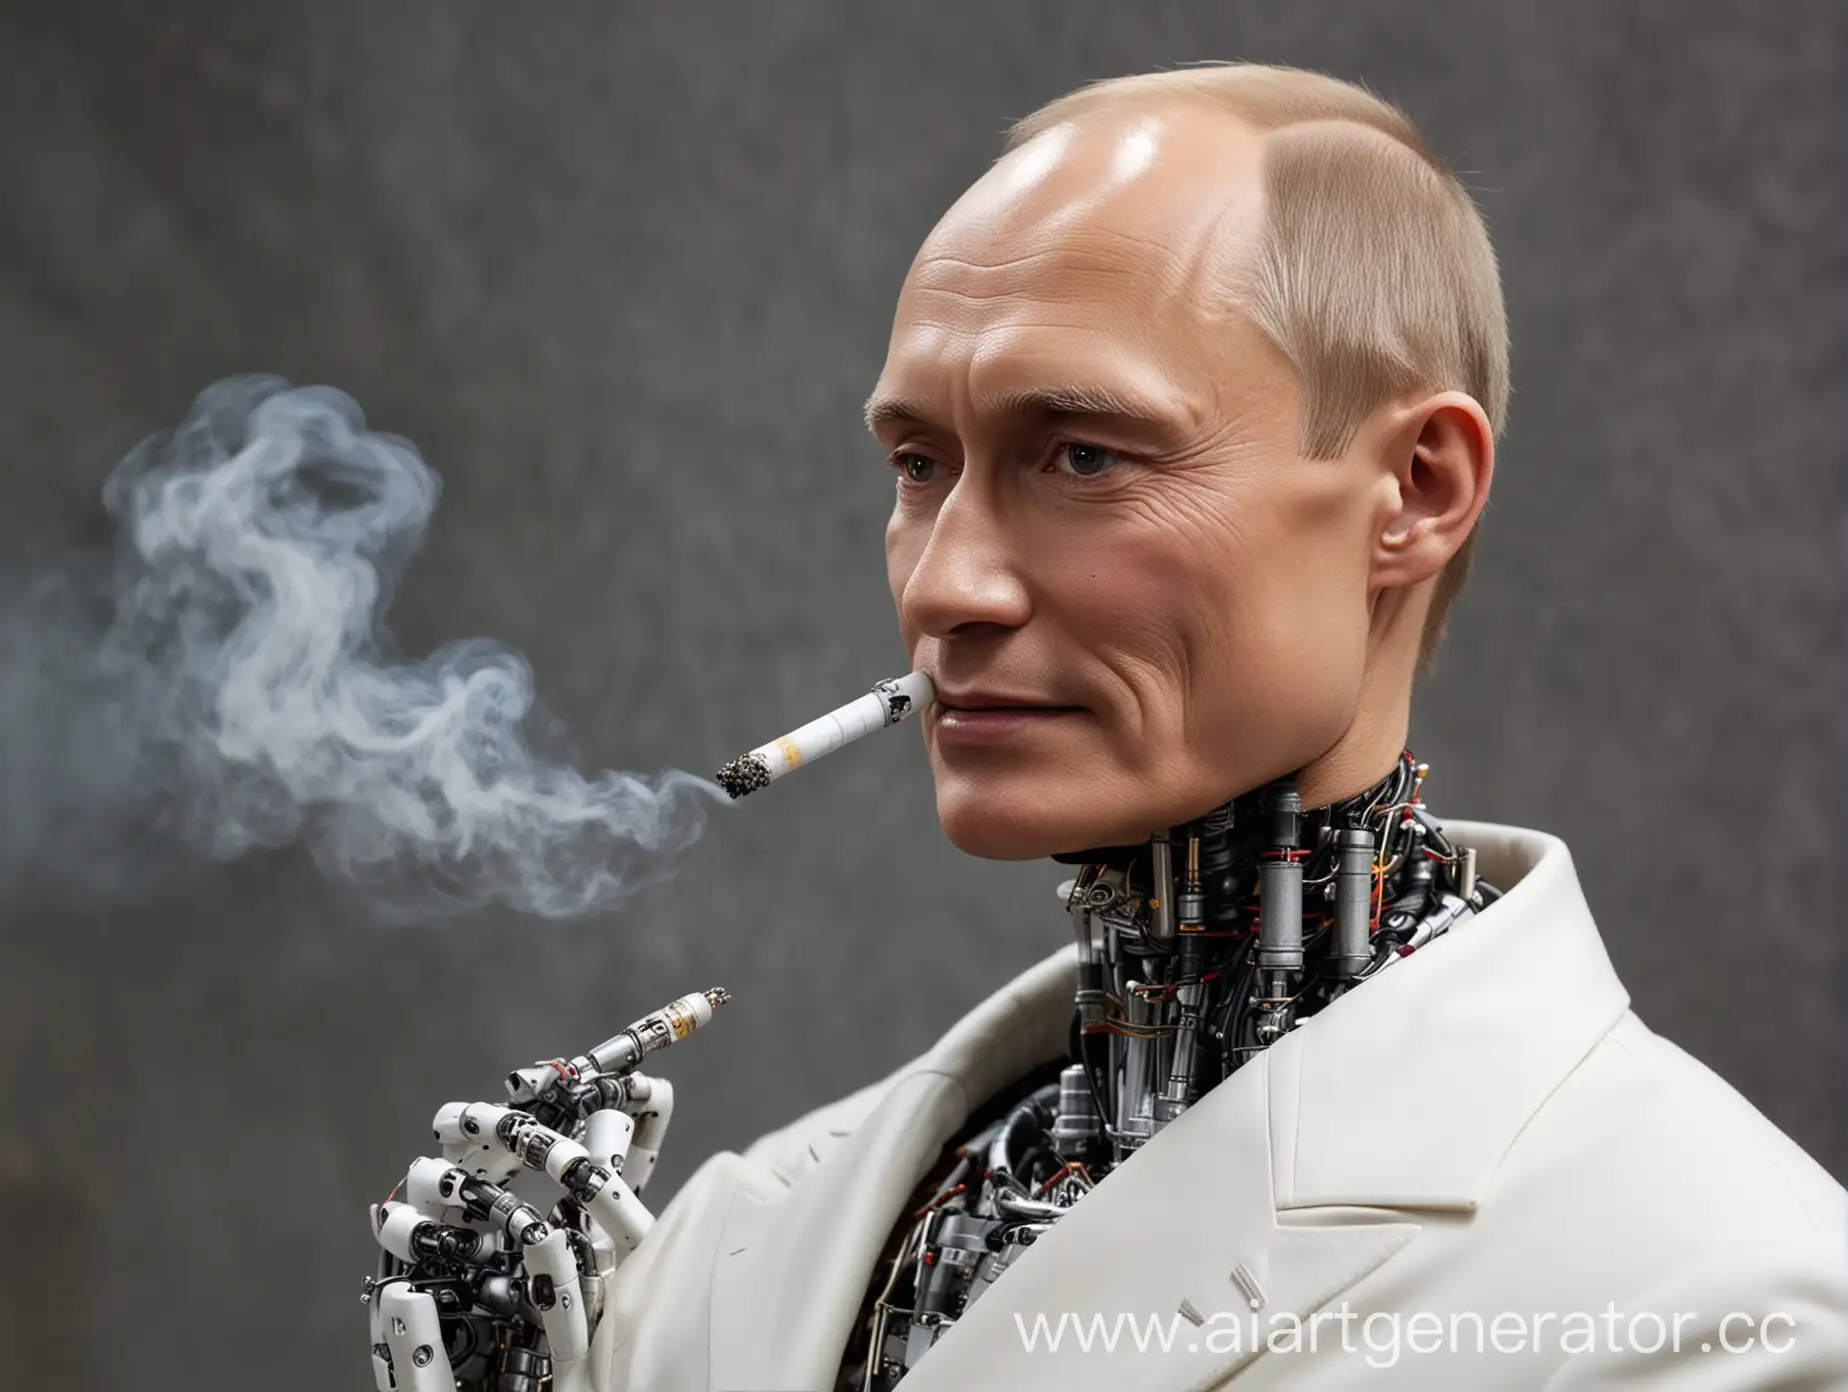 Robot-Skynet-Putins-Brothers-Ideal-Twin-Smokes-a-Cigarette-with-a-Smile